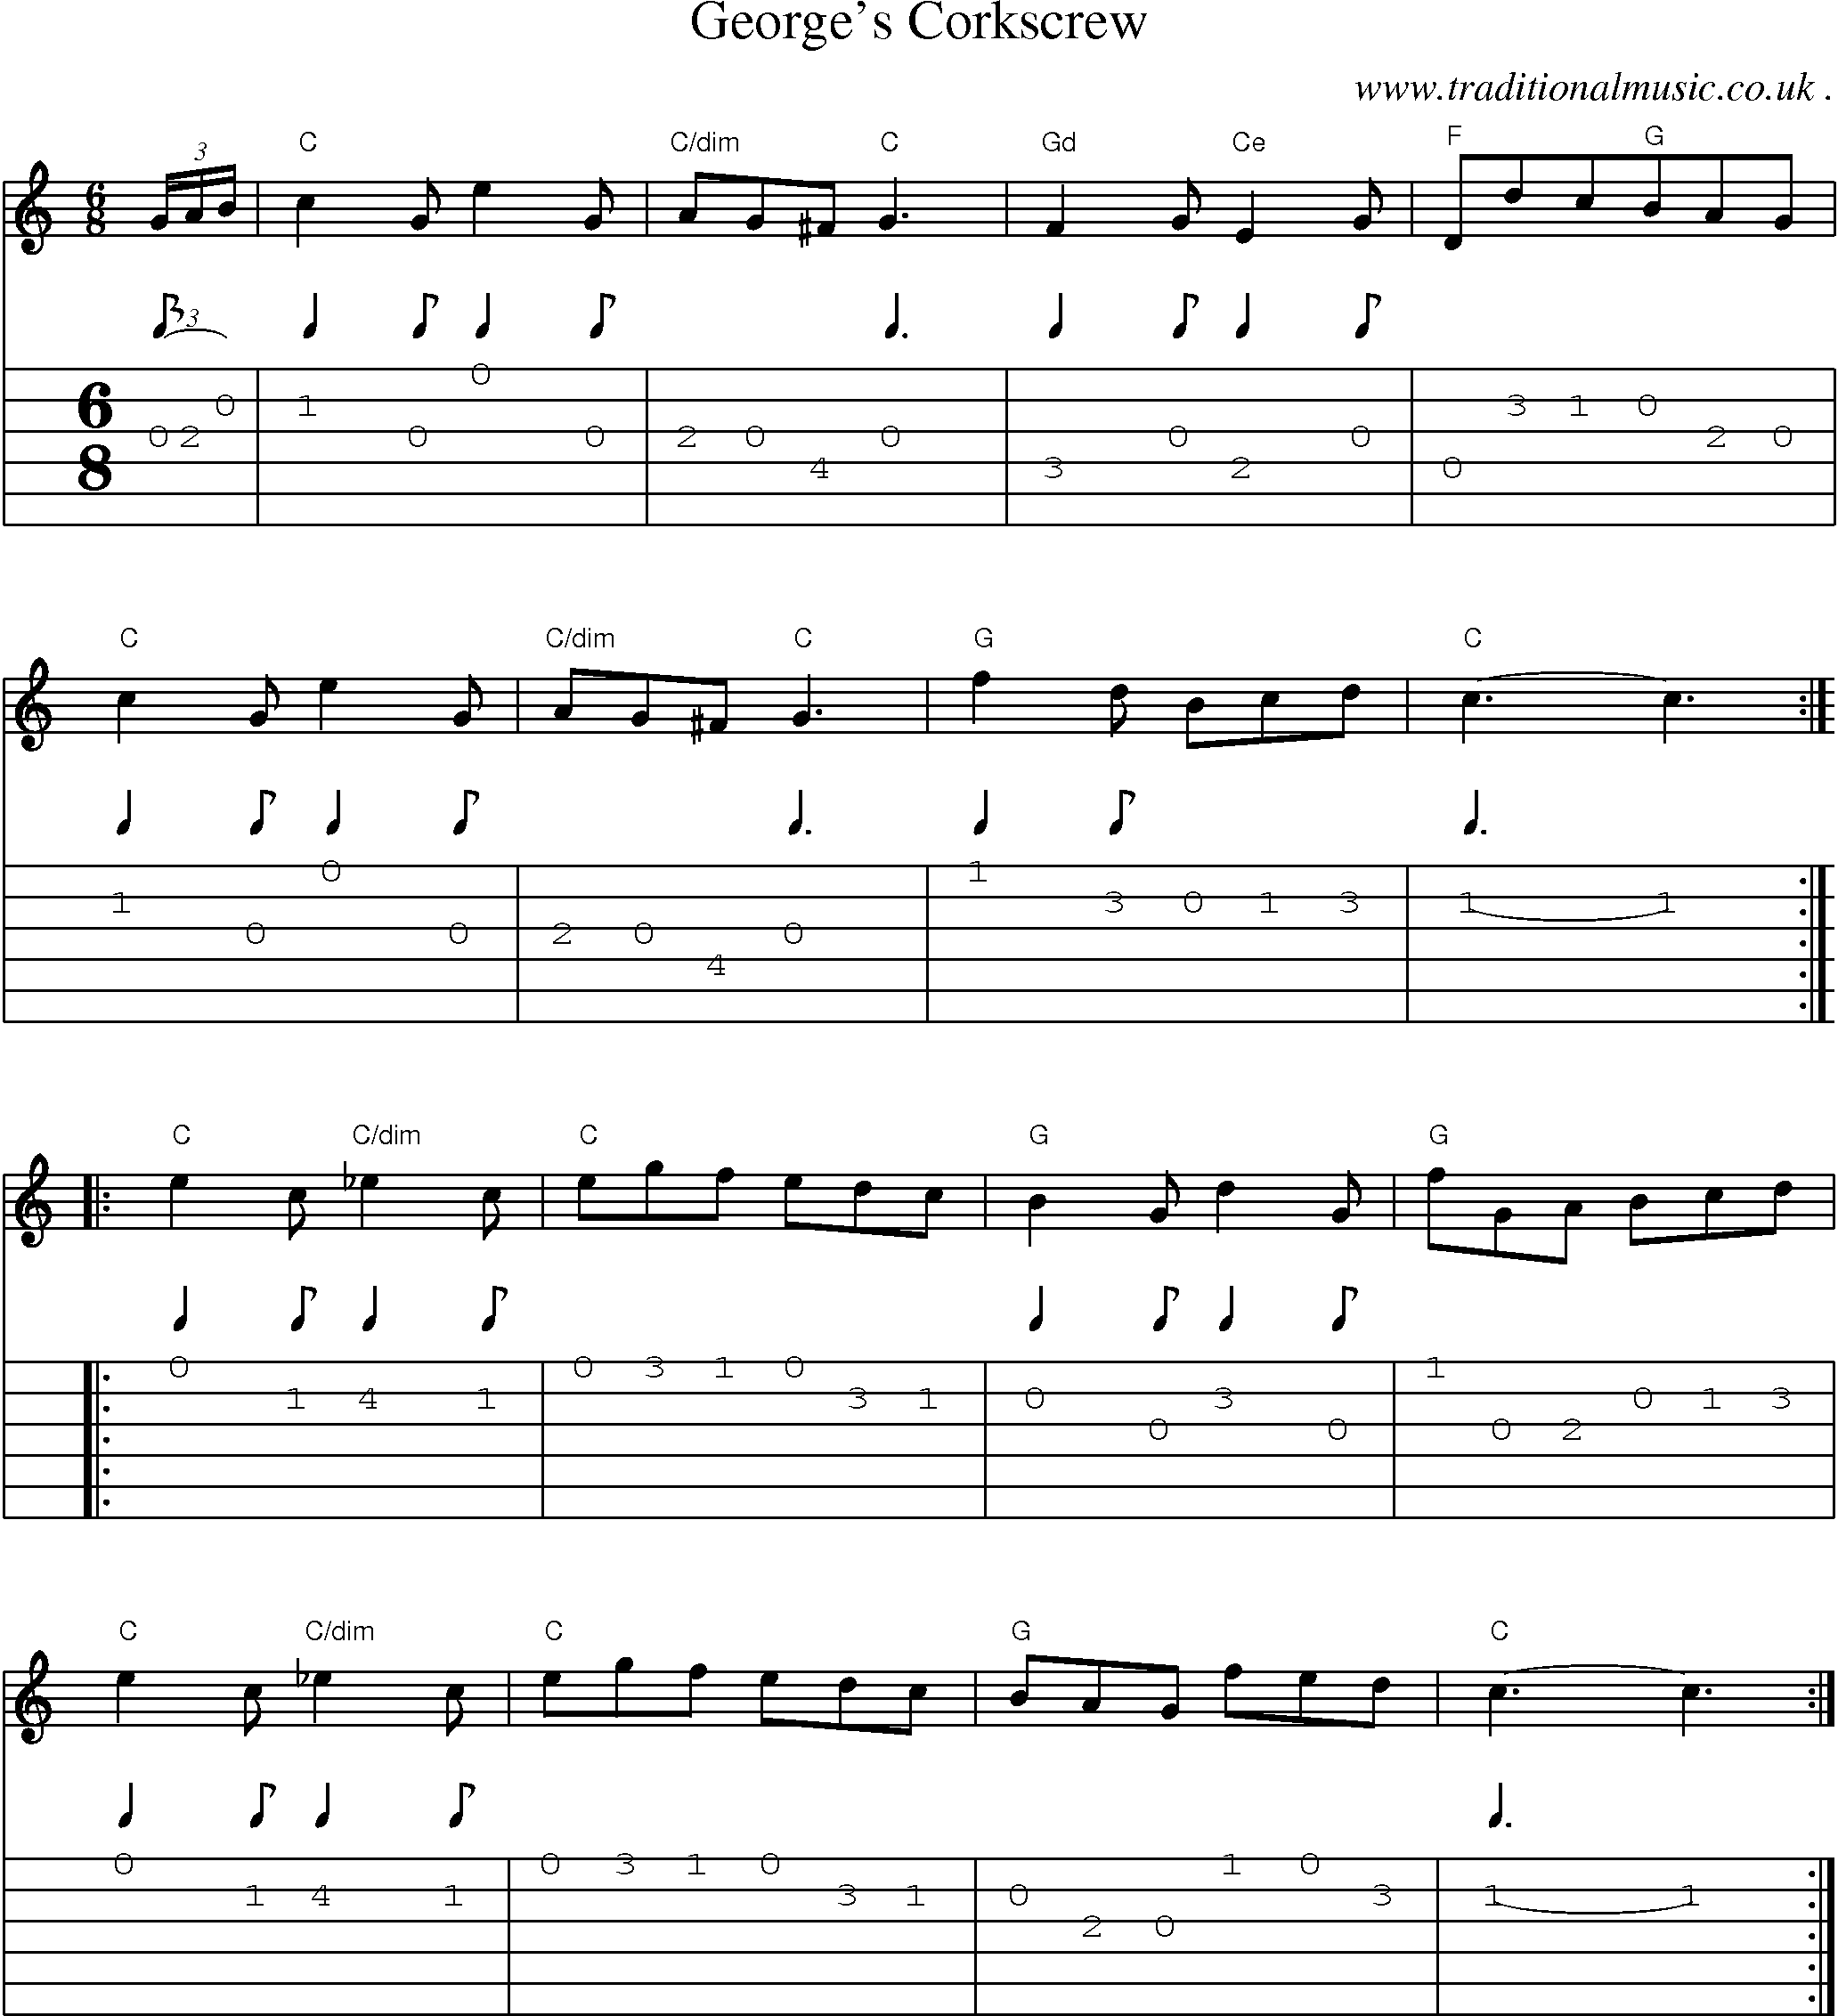 Sheet-Music and Guitar Tabs for Georges Corkscrew